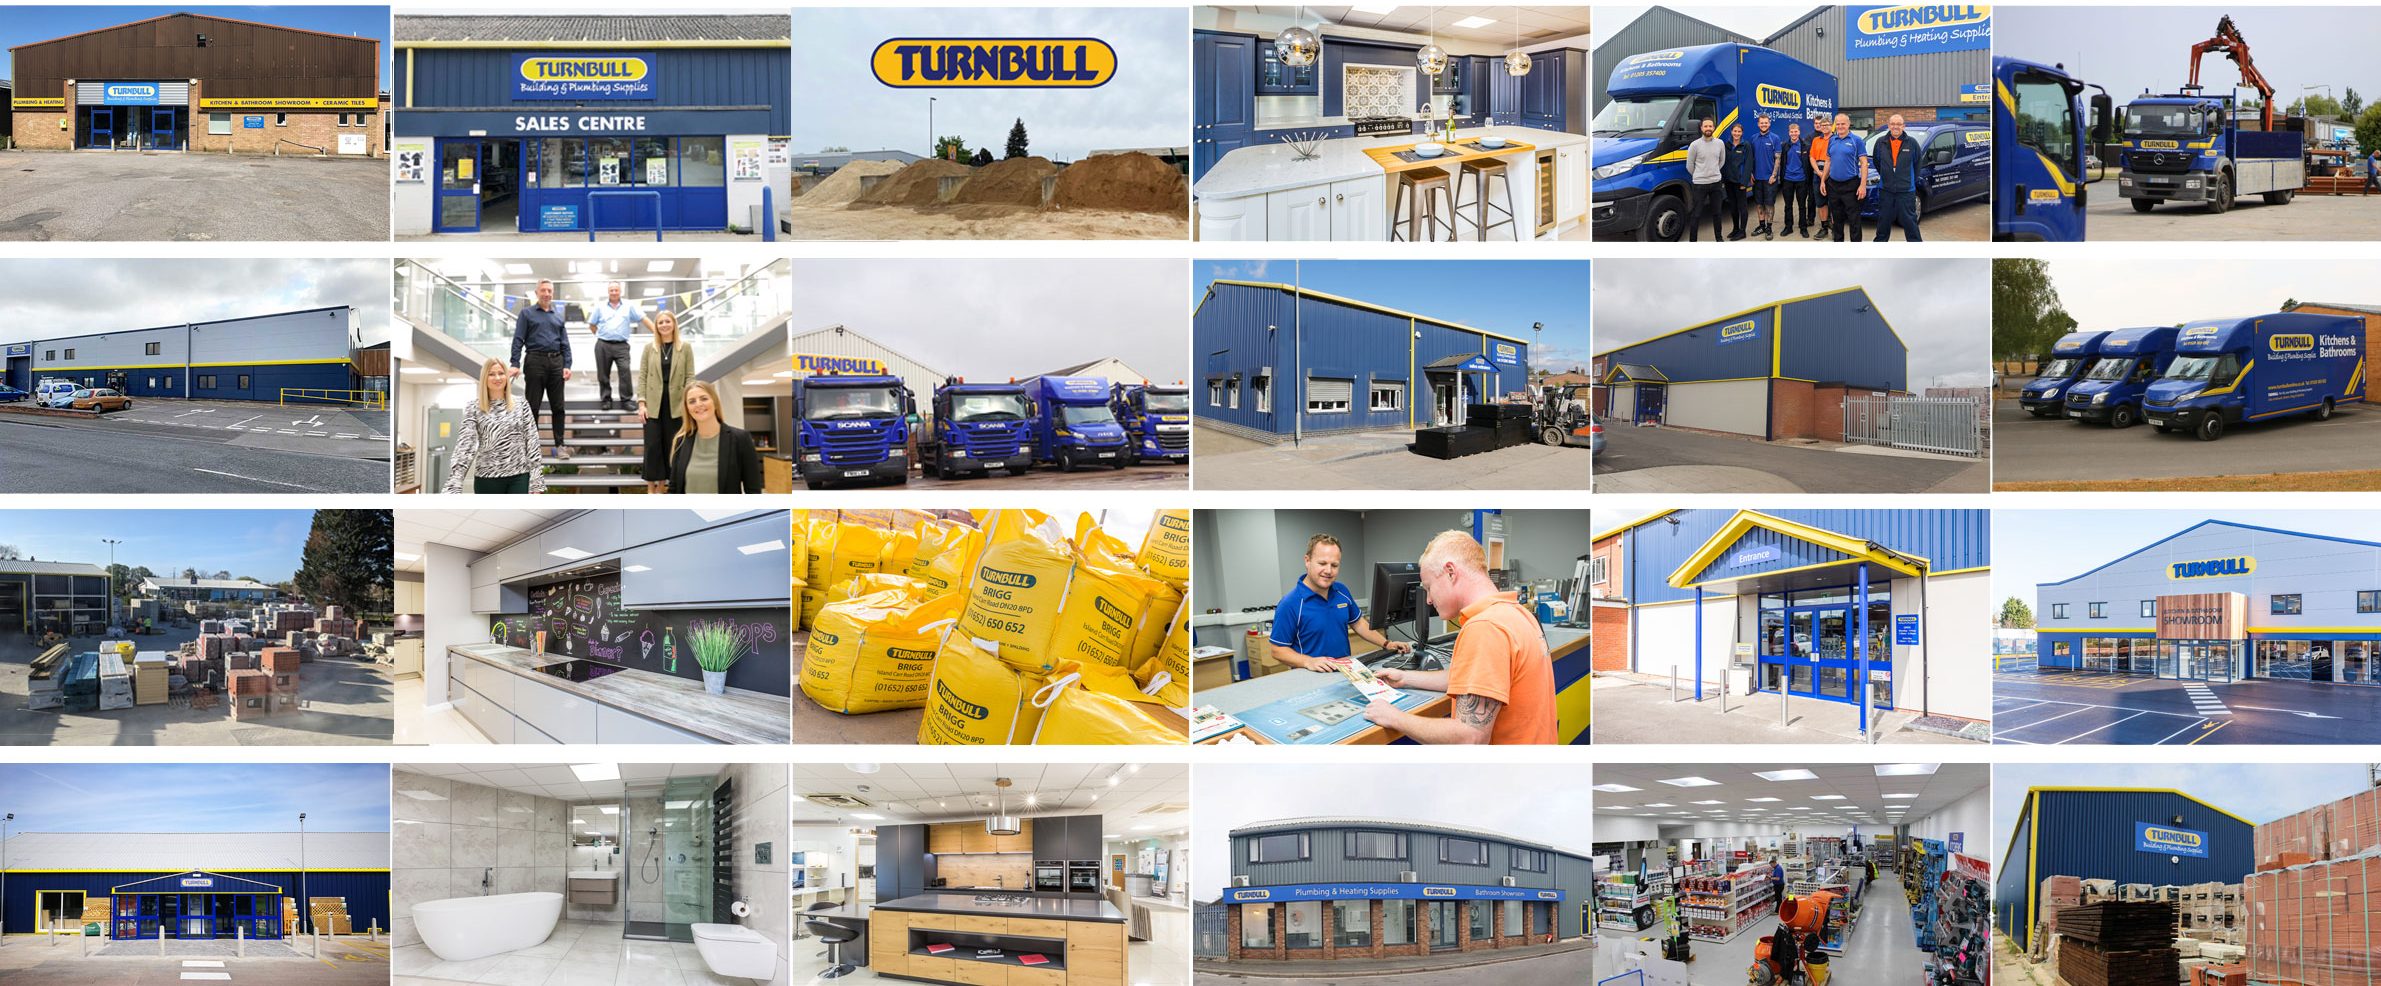 Turnbull - a company with varied employment opportunities